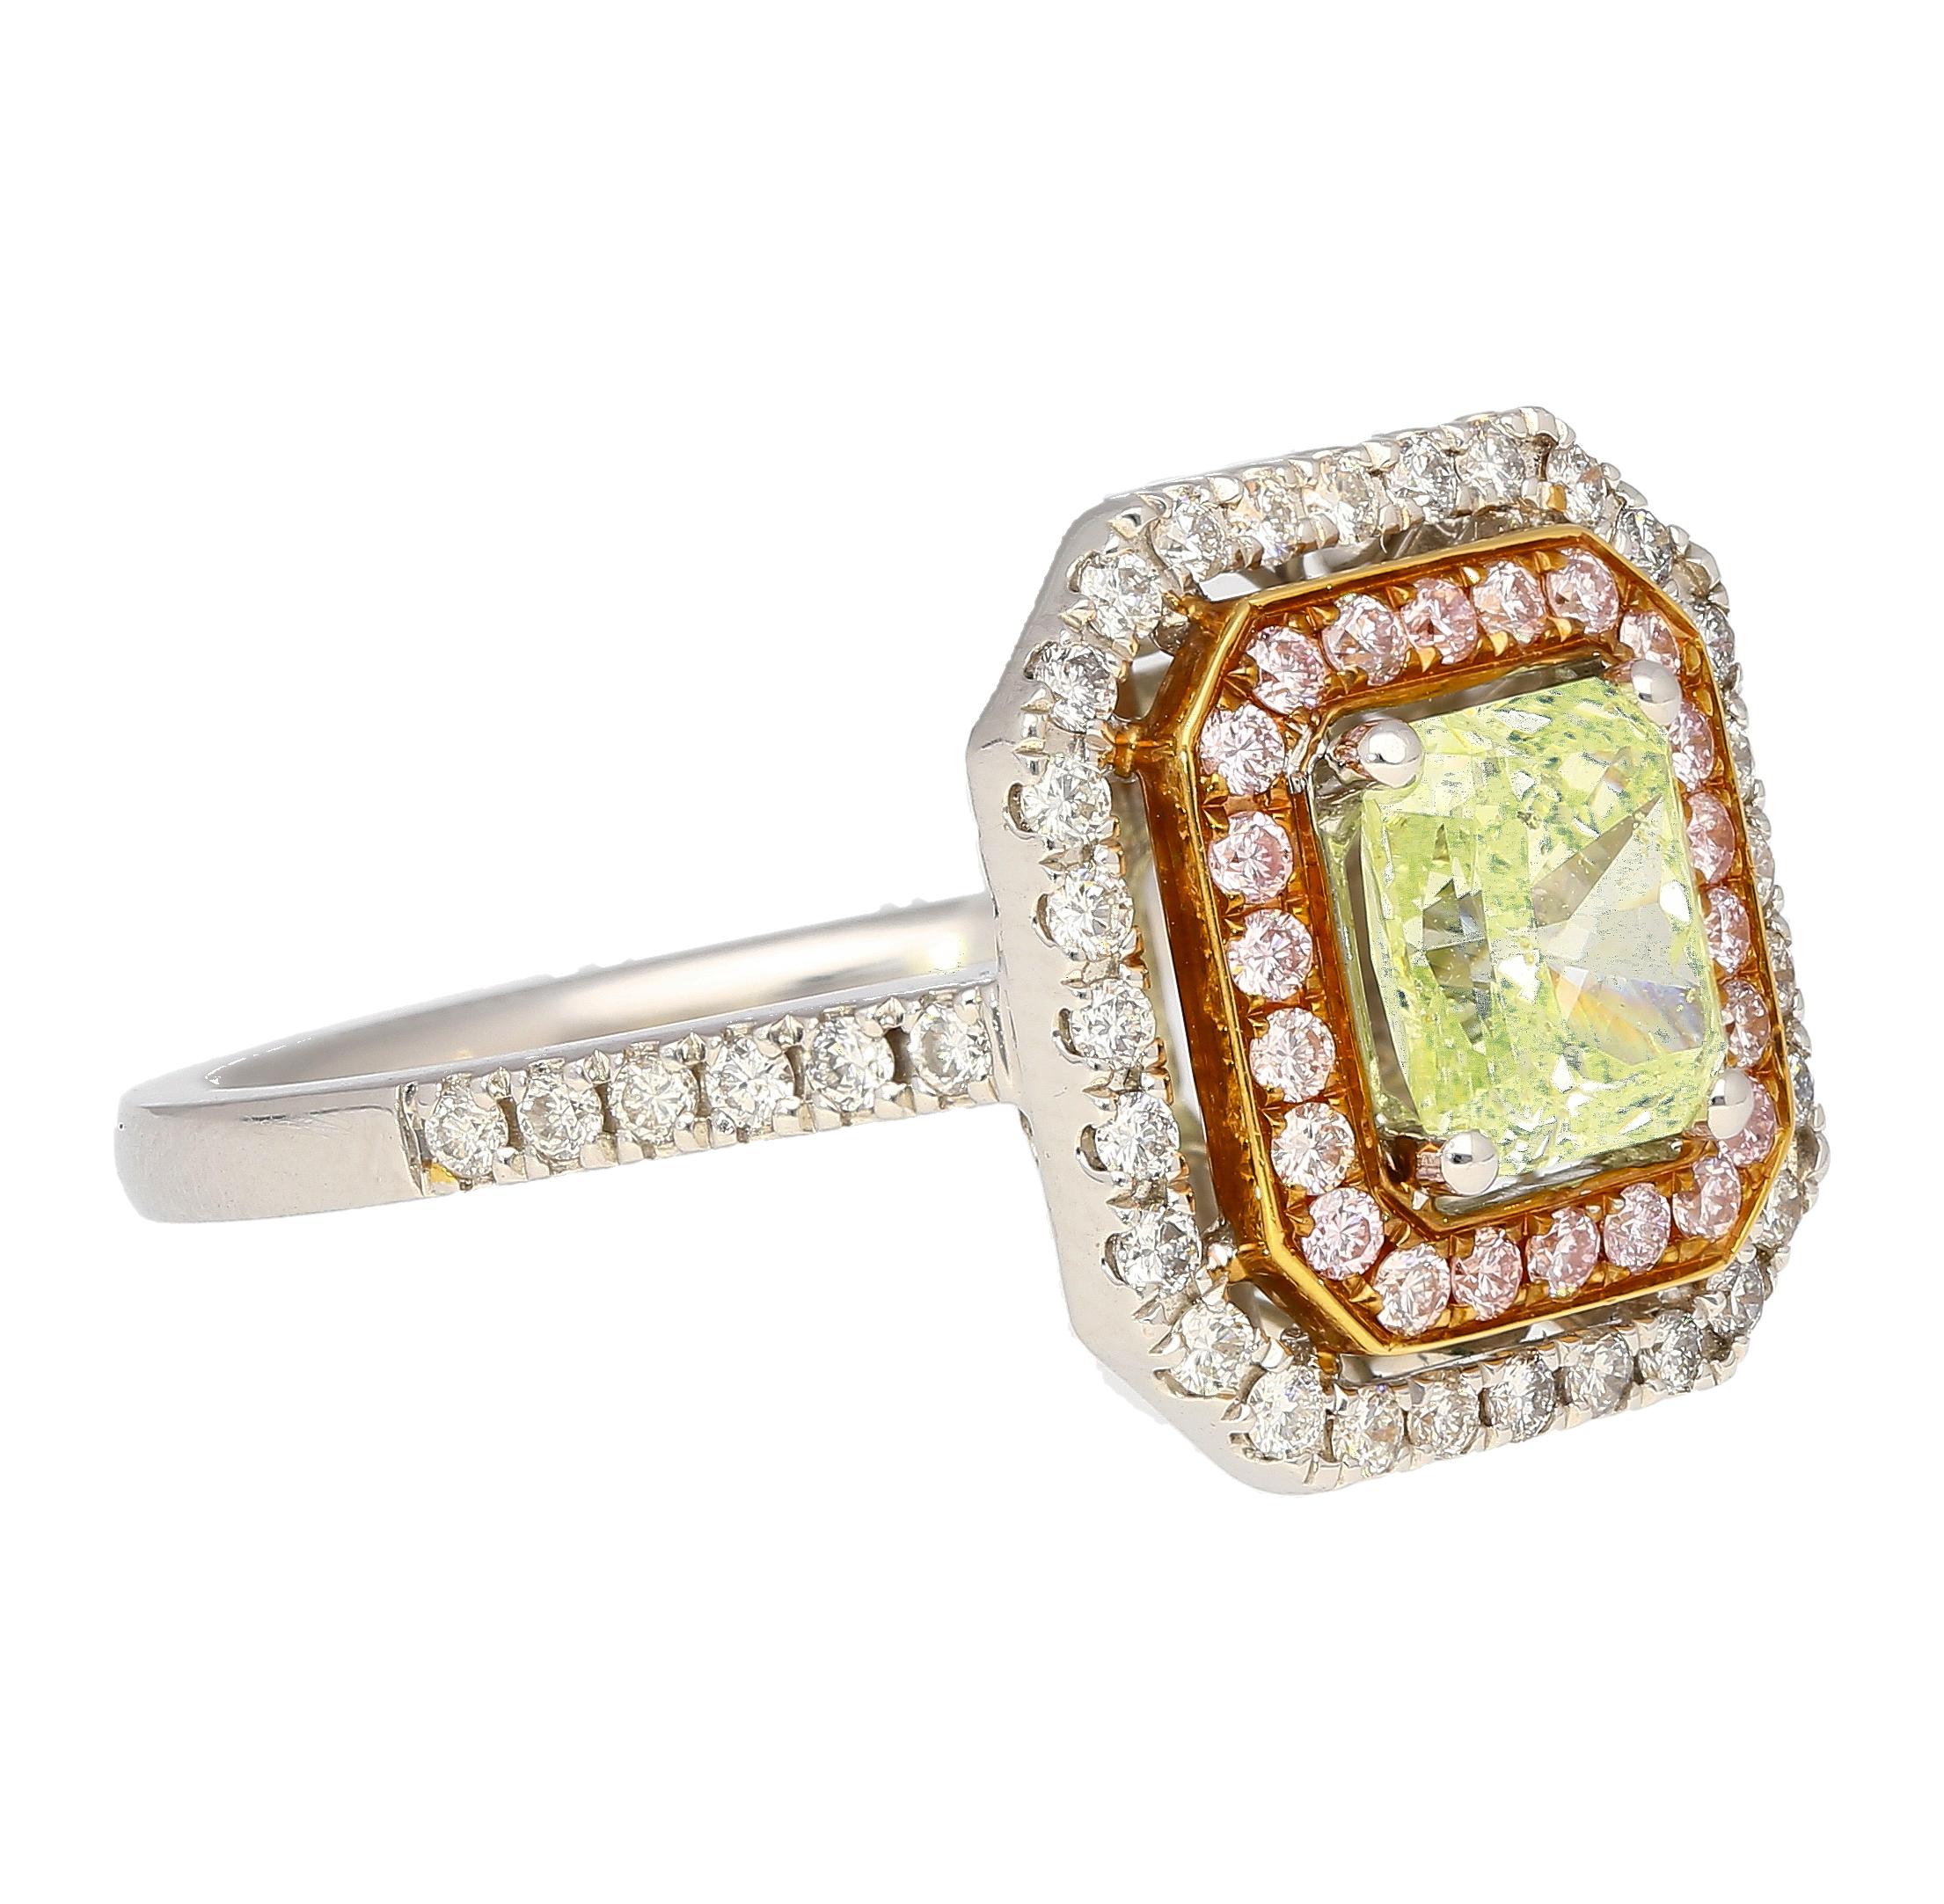 GIA Cert 1.12 Carat Radiant Cut Fancy Light Green-Yellow Diamond Ring in 18k In New Condition For Sale In Miami, FL